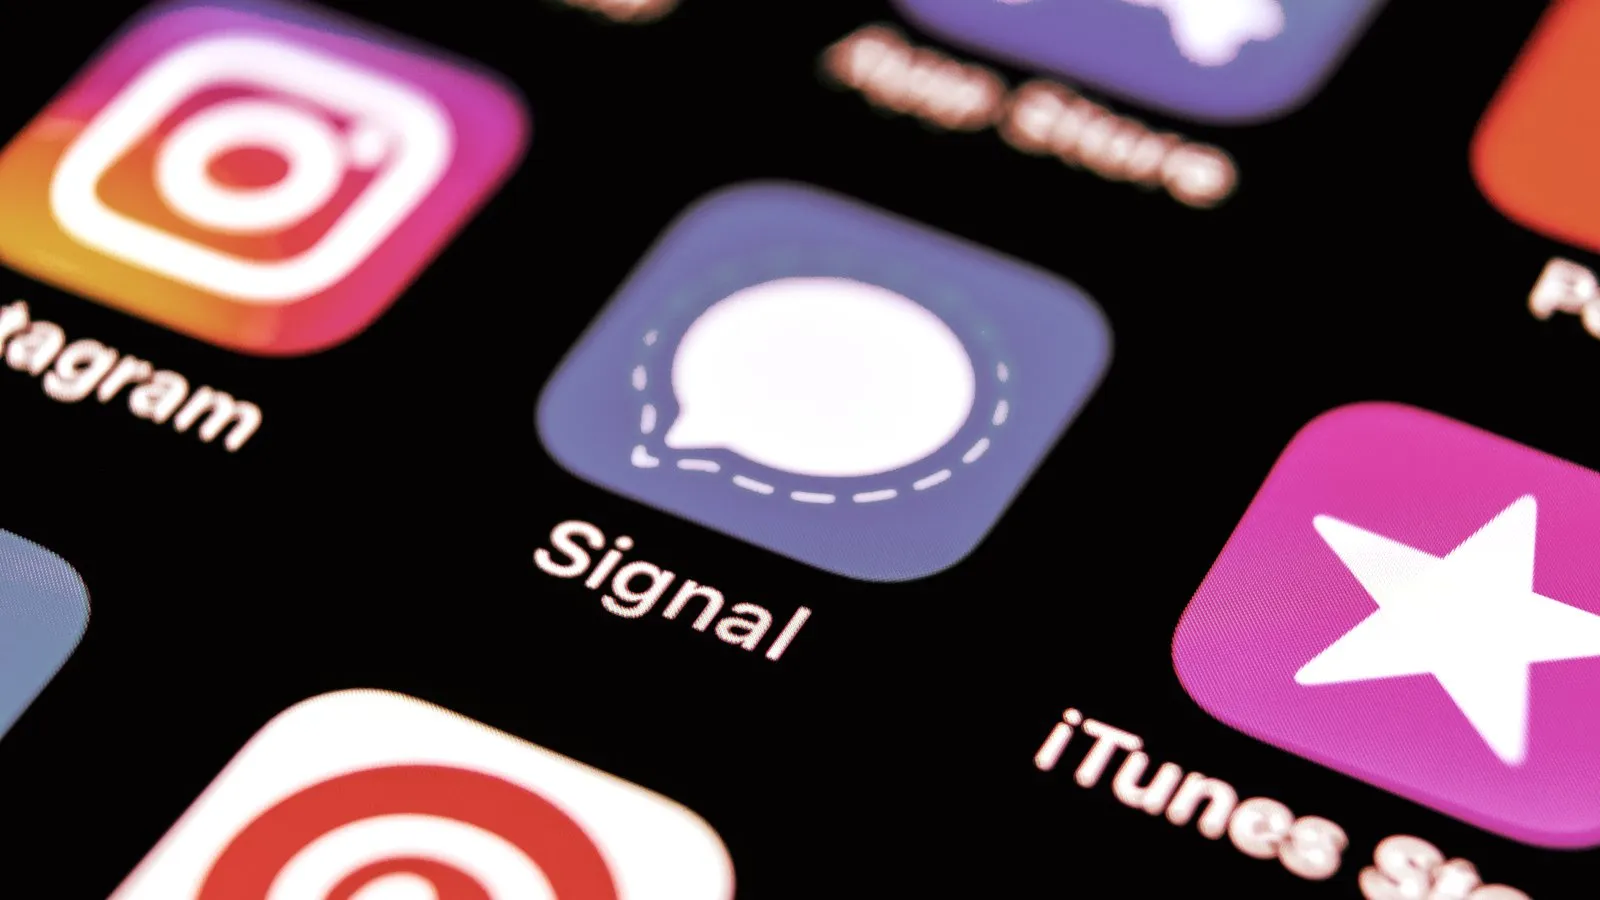 Signal is a privacy-first messenger app. Image: Shutterstock